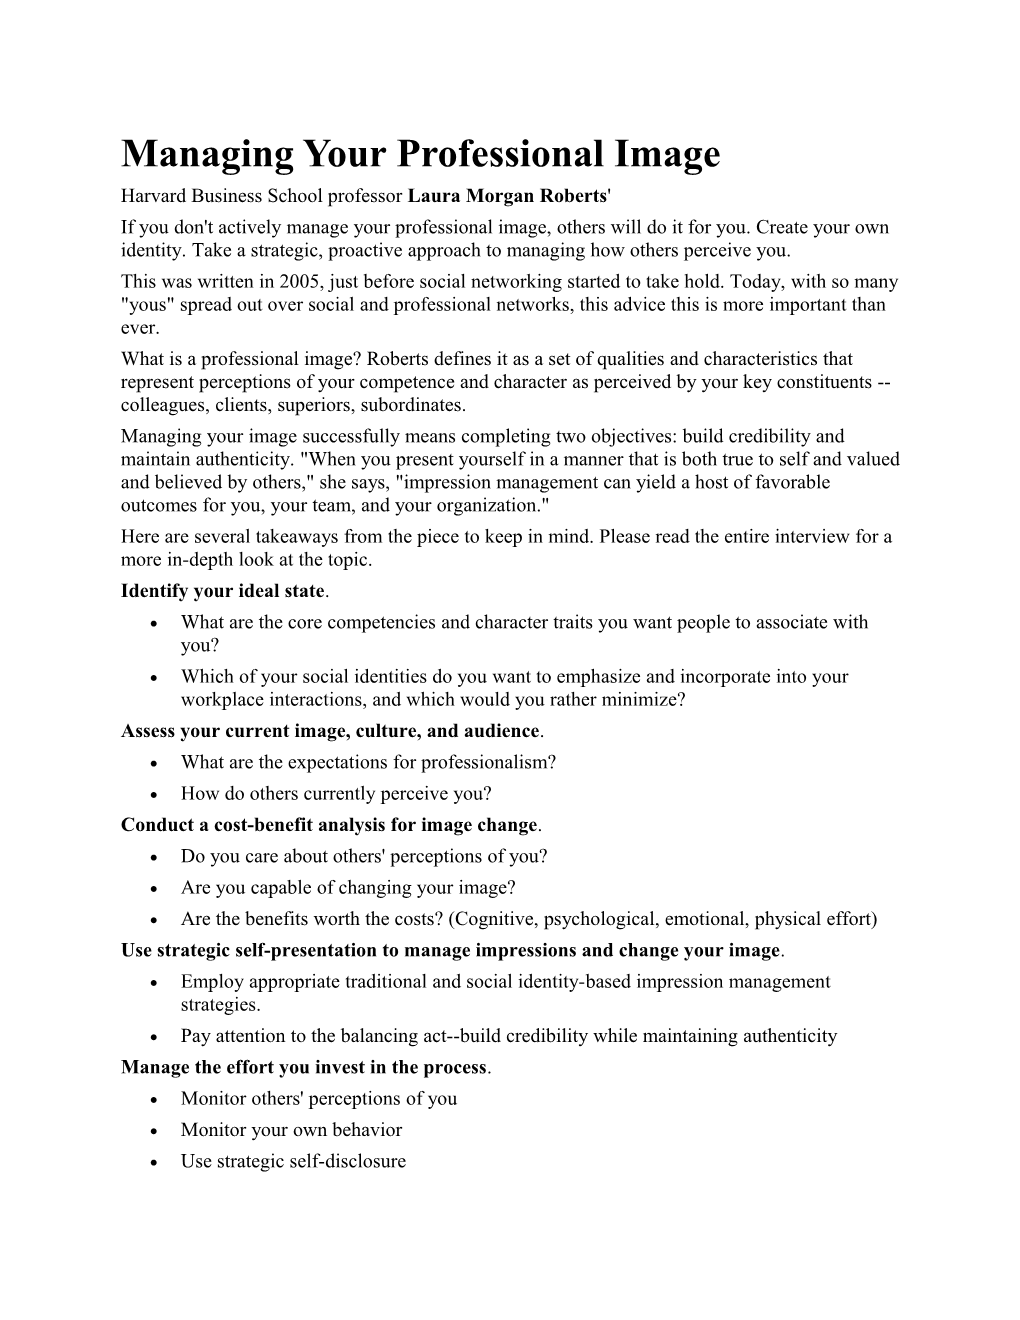 Managing Your Professional Image